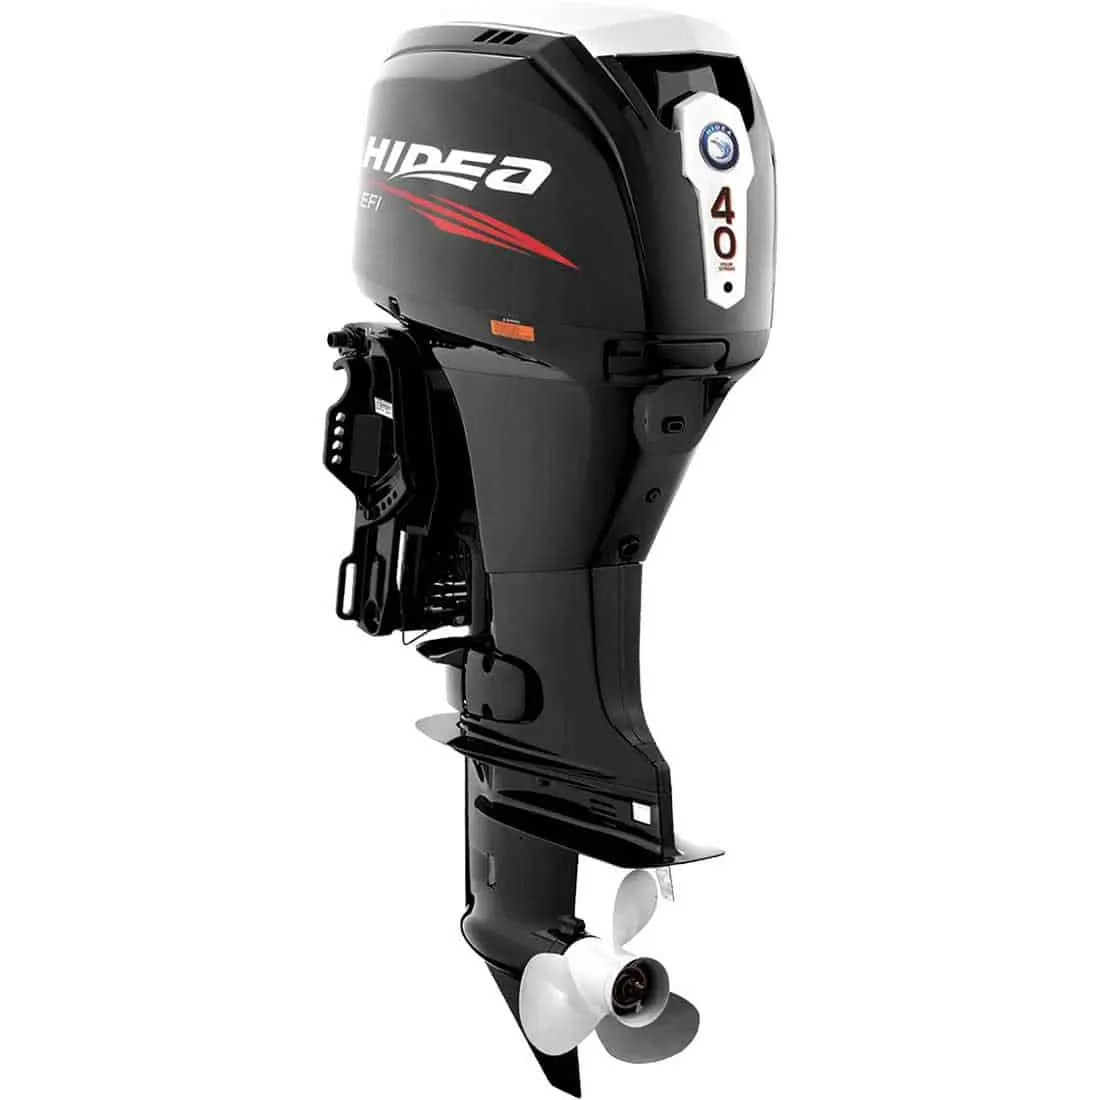 "Don't Wait, Act Now: Outboard Motors for Sale"